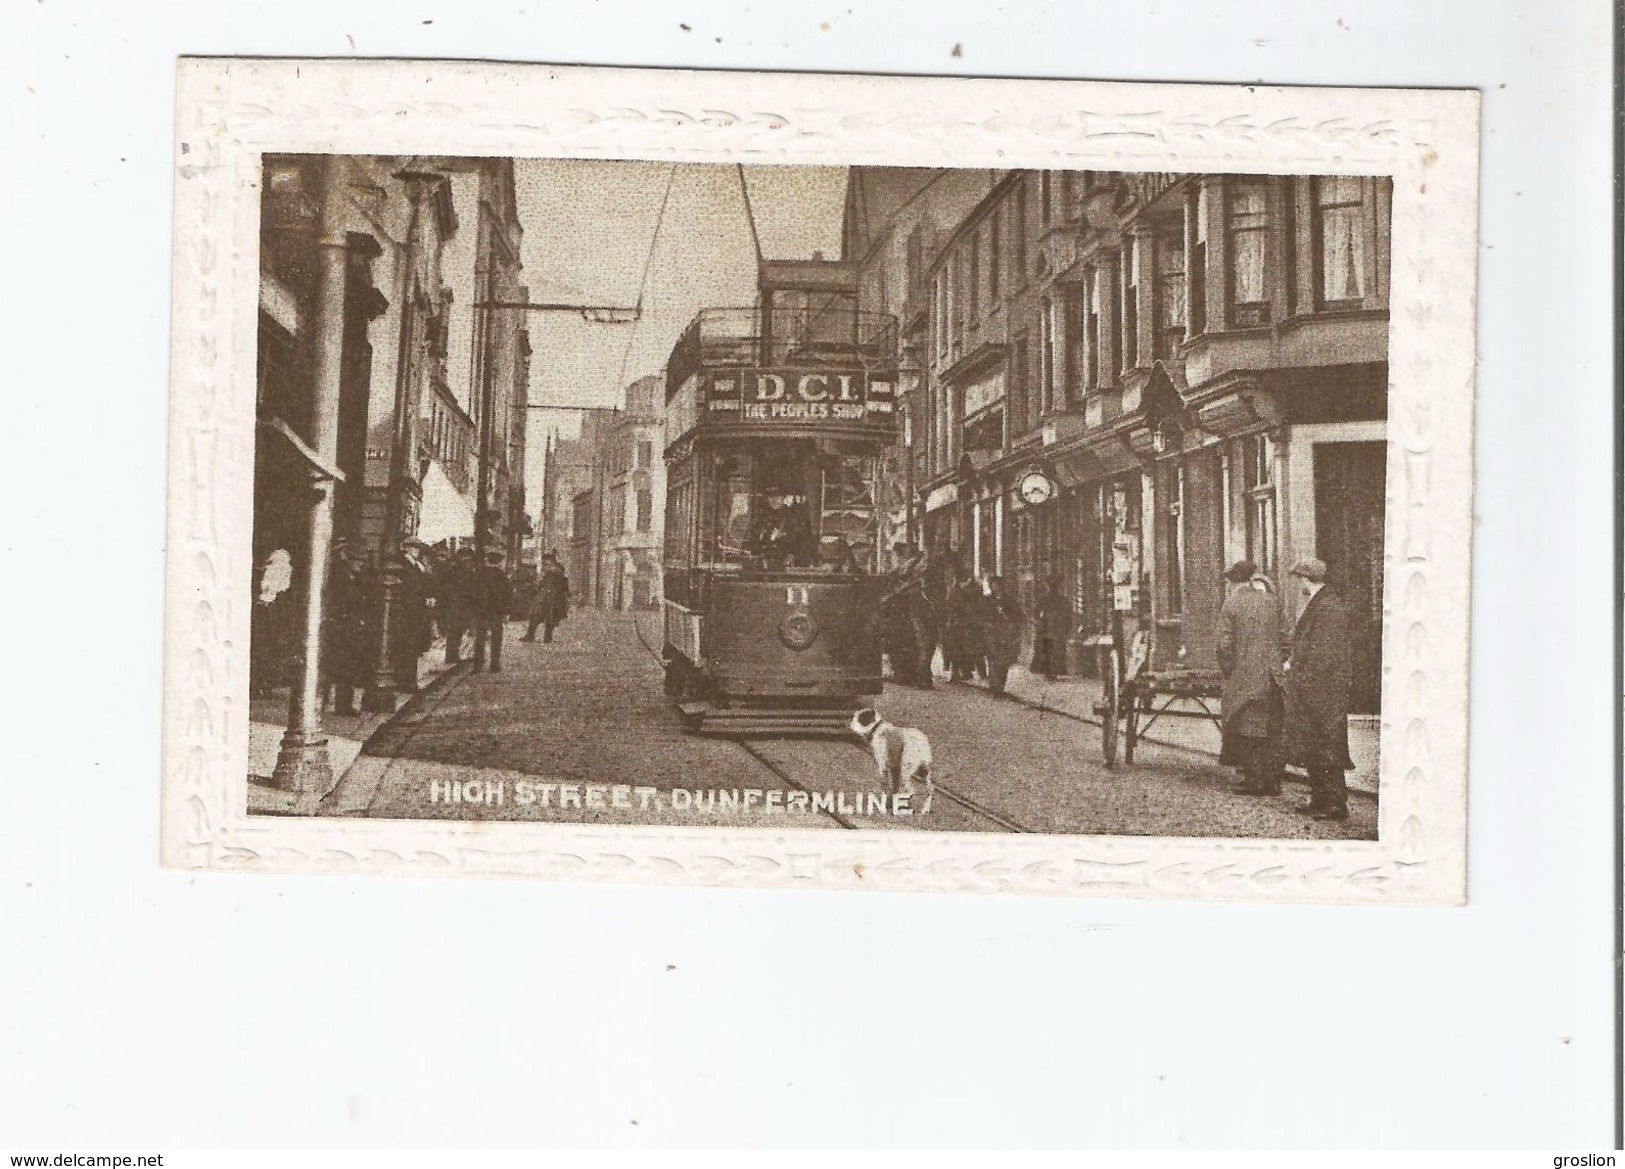 DUNFERMLINE 4467  HIGH STREET (TRAMWAY AND DOG ) 1917 - Fife